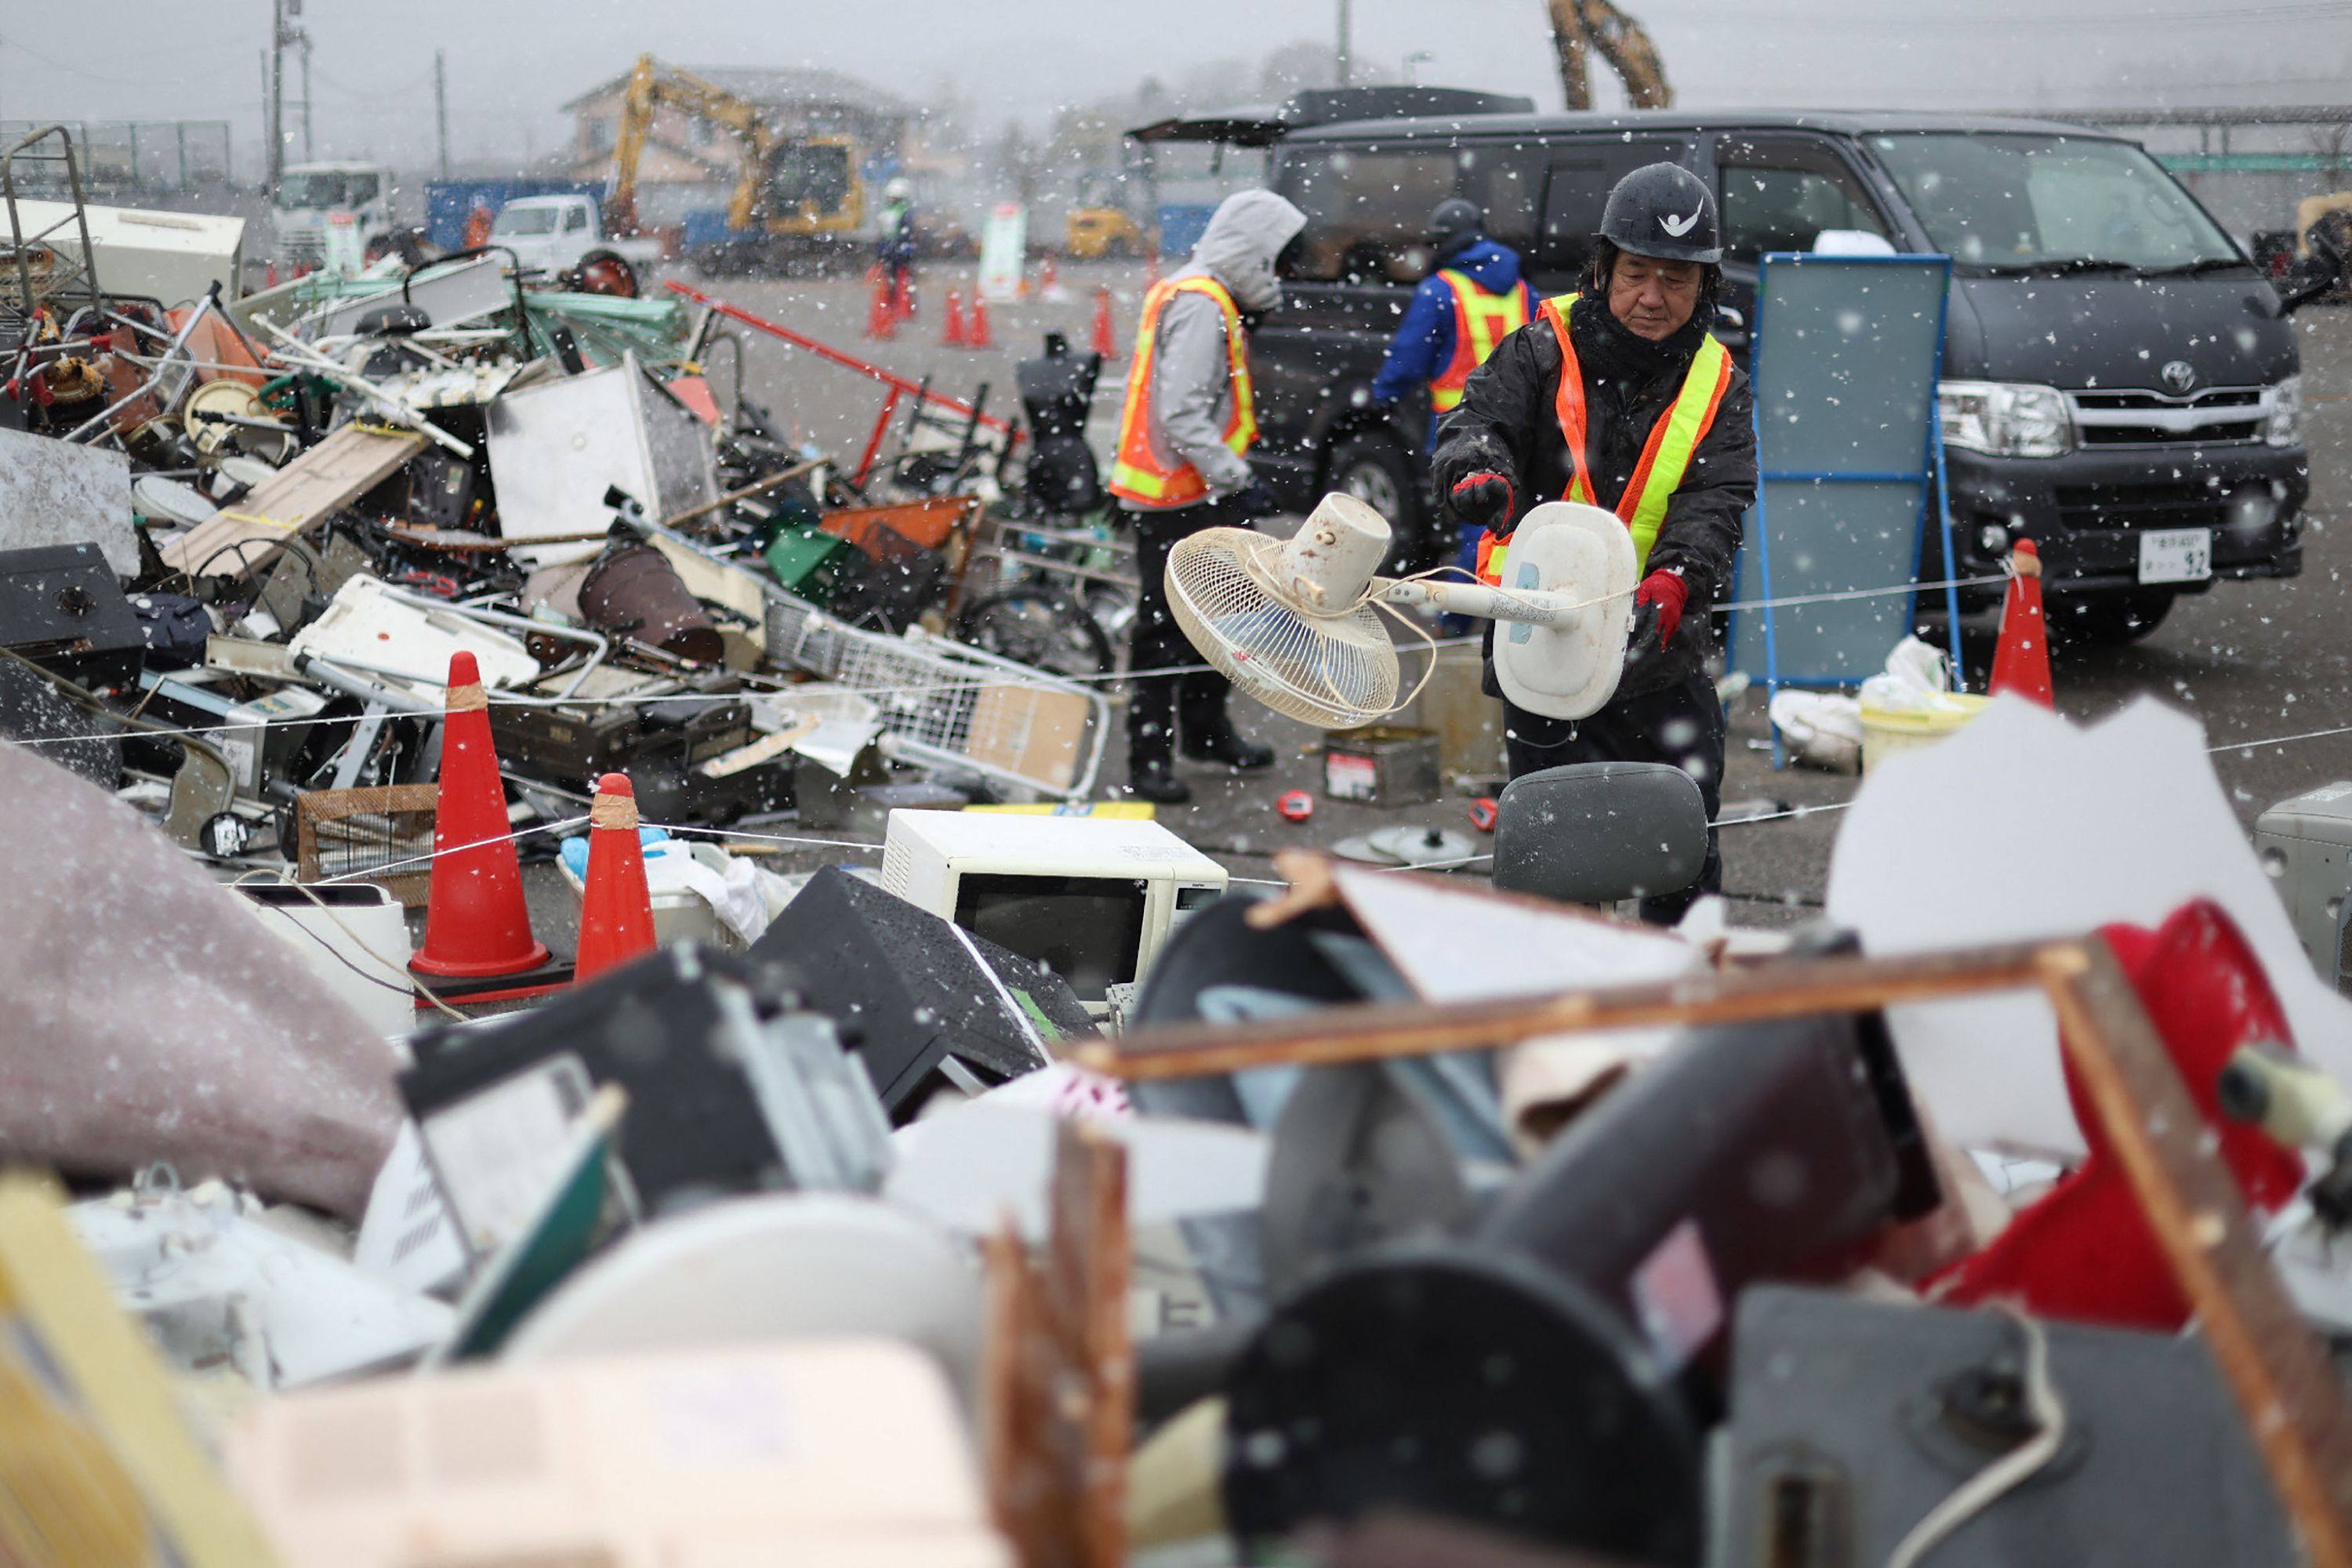 Men work at a disaster waste collection site in Nanao, Ishikawa prefecture on January 15. Photo: AFP